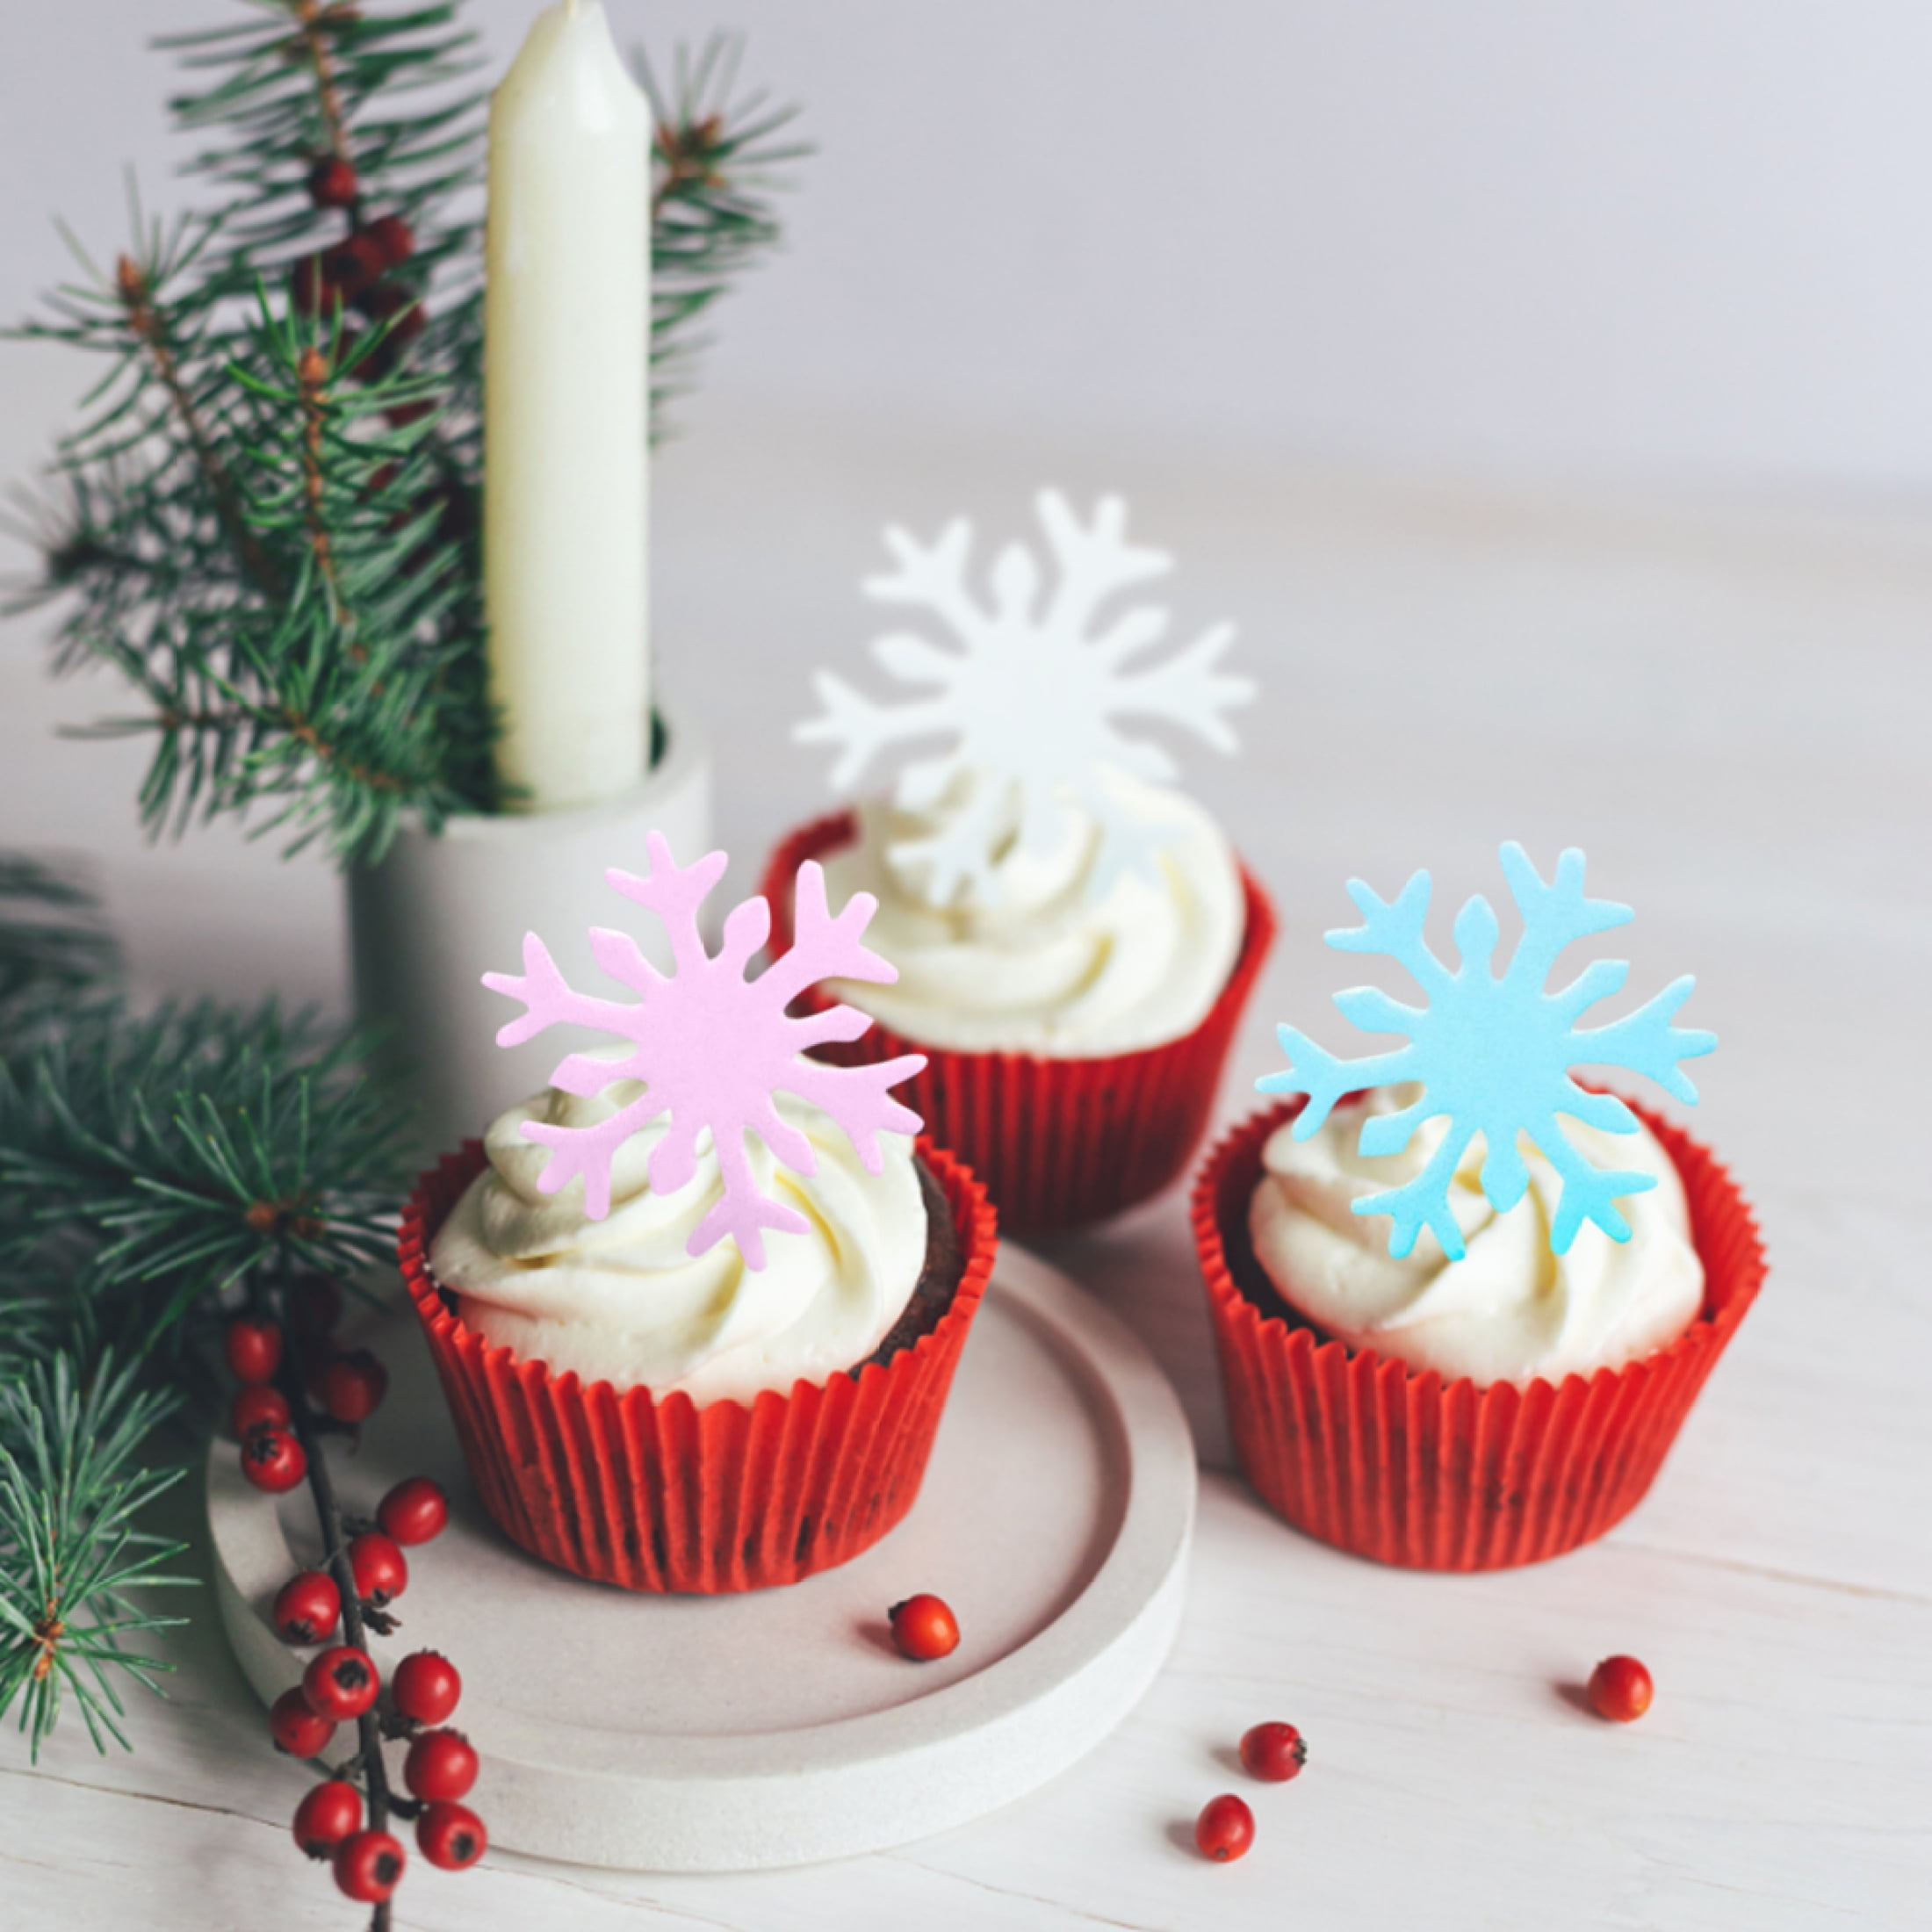 Snowflake Cake Decorations by Deb's Kitchen Cakes - 40 x Edible